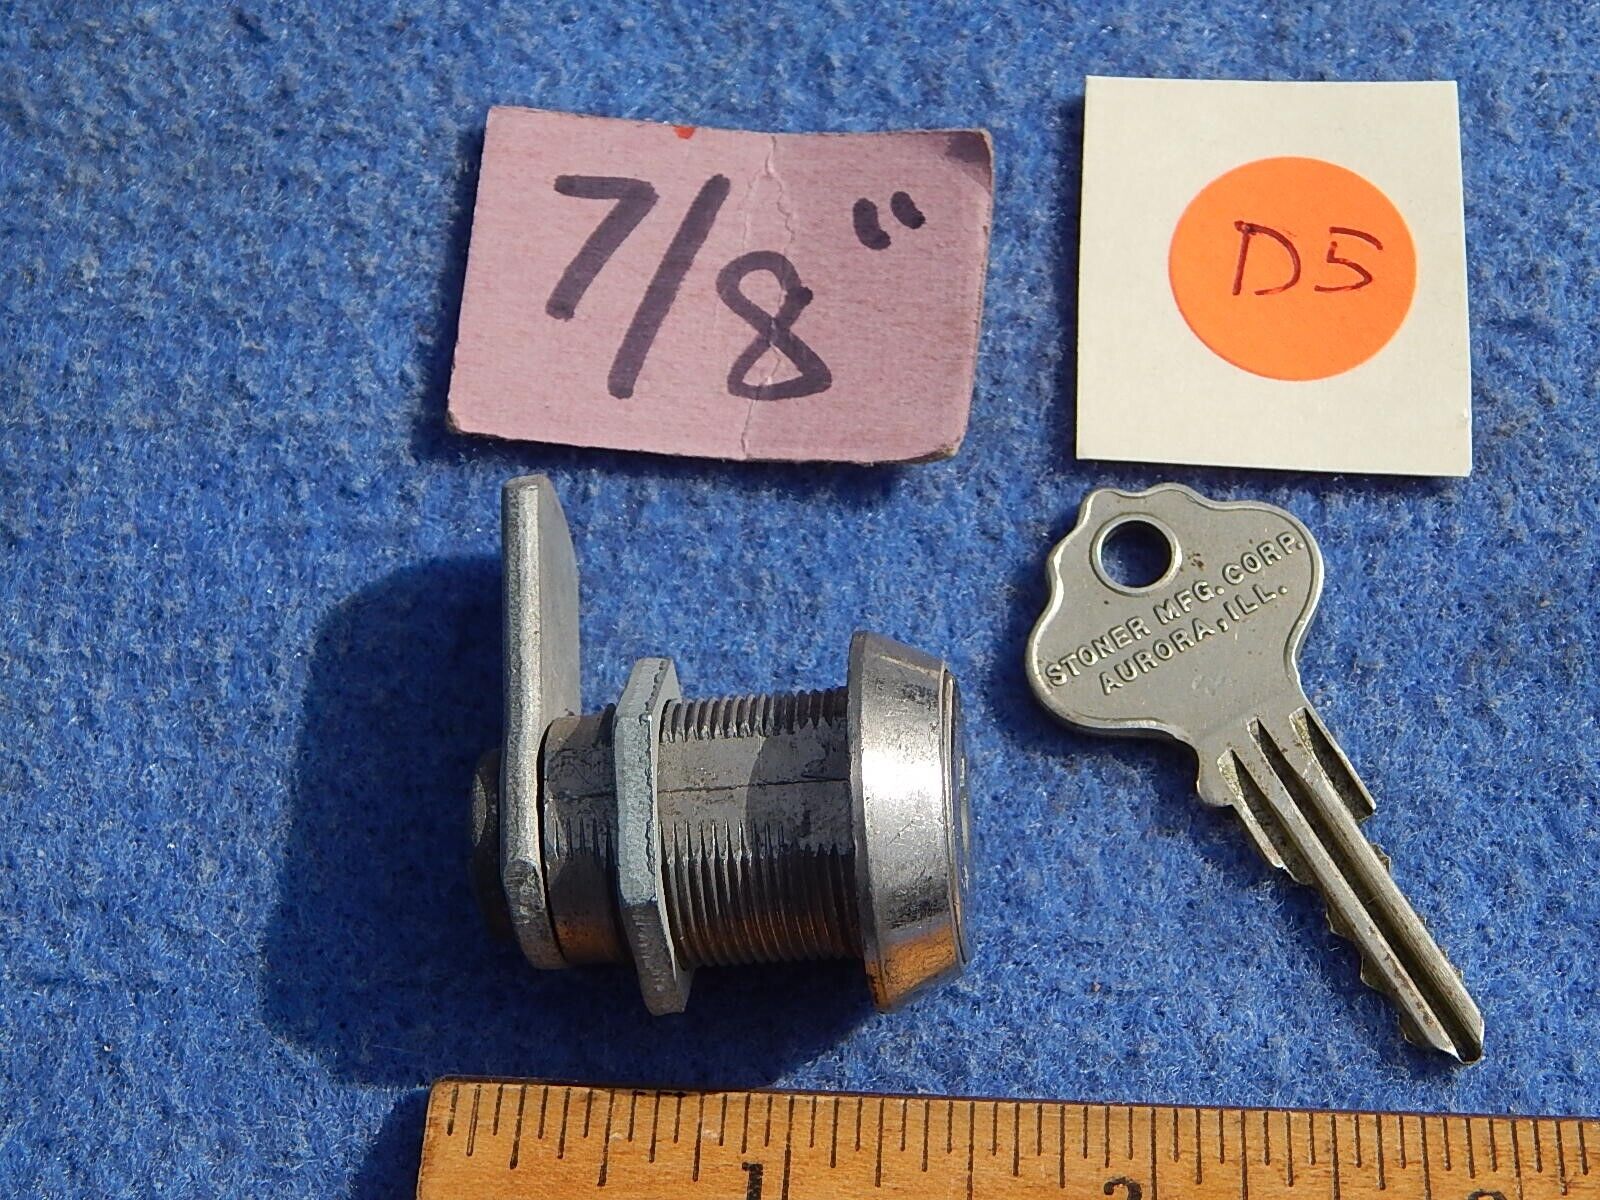 1940s Stoner Game Lock 7/8 inch, Independent Lock Company with key VD 1737